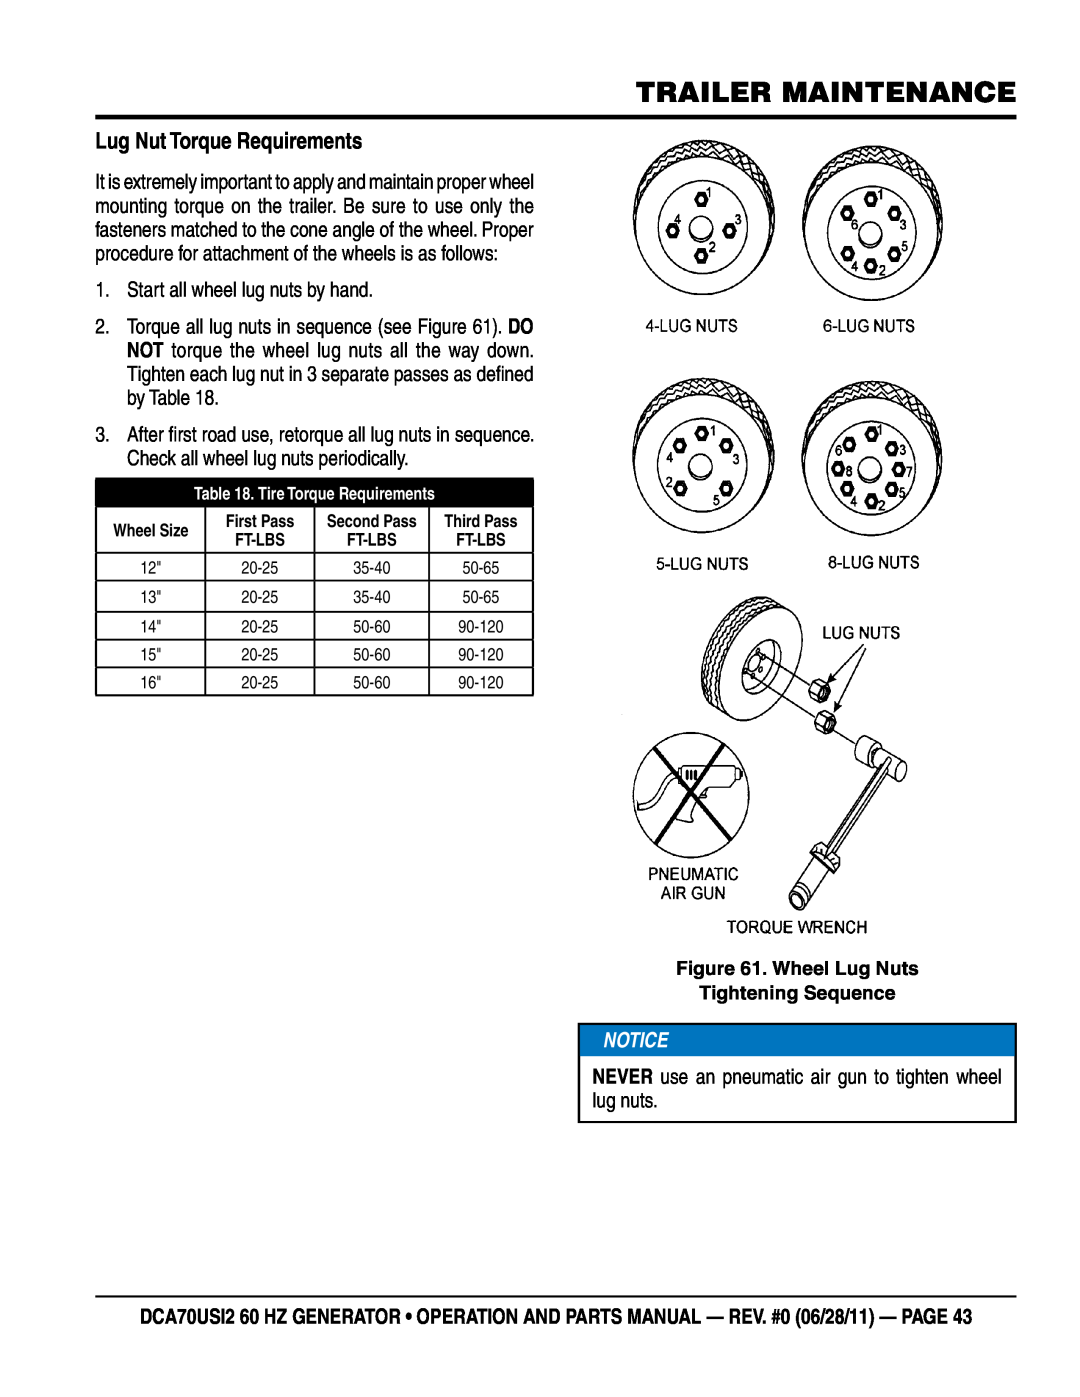 Multiquip DCA70USI2 manual Lug Nut Torque Requirements, Trailer Maintenance, Wheel Lug Nuts Tightening Sequence, Wheel Size 